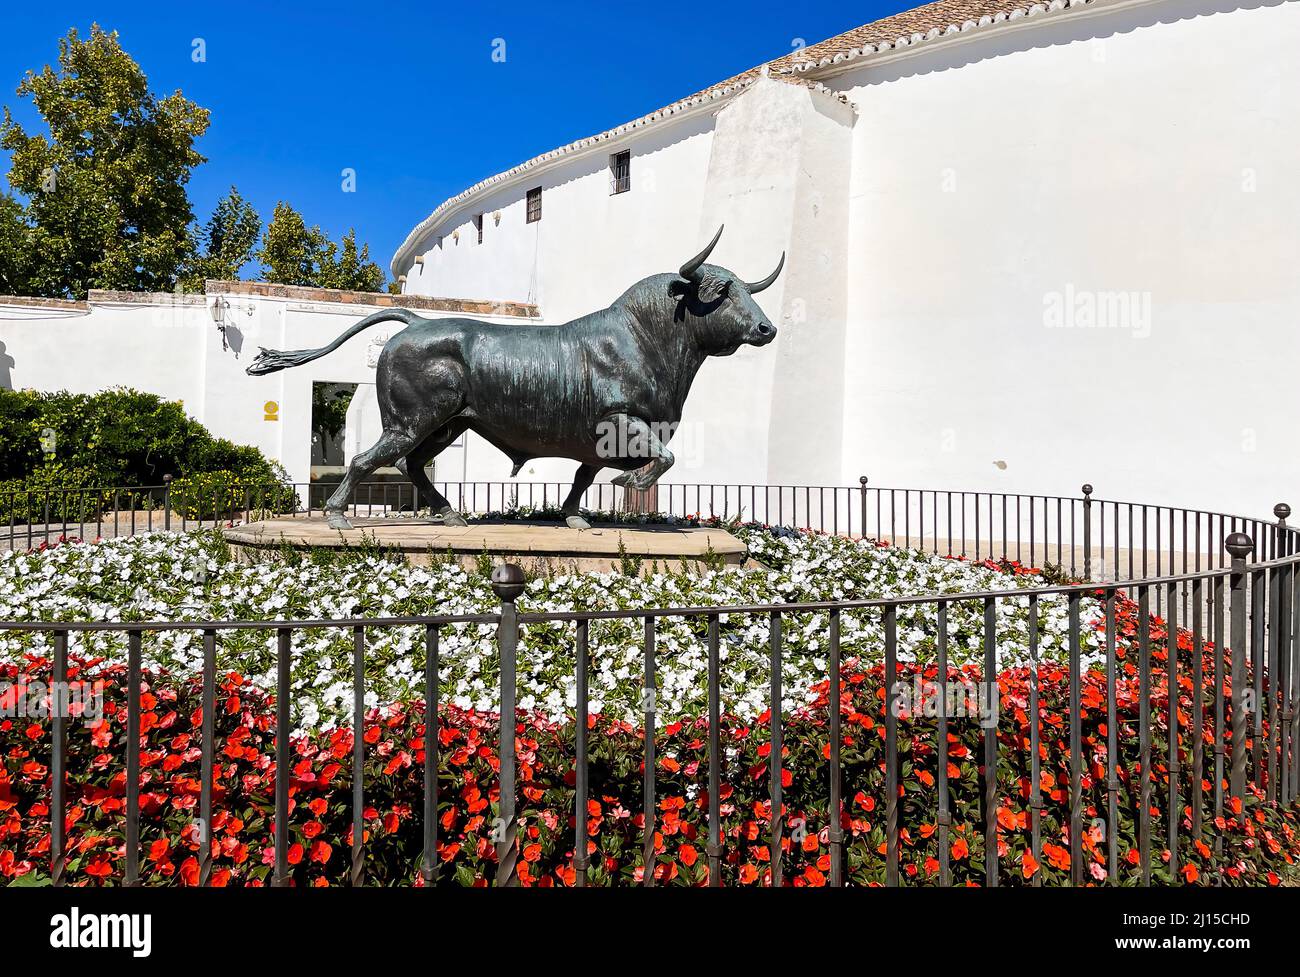 Sculpture of a fighting bull at the Plaza de Toros of Ronda city, in Andalusia, Spain. It's a tribute to the Bull of Lidia, the spanish fighting bull. Stock Photo